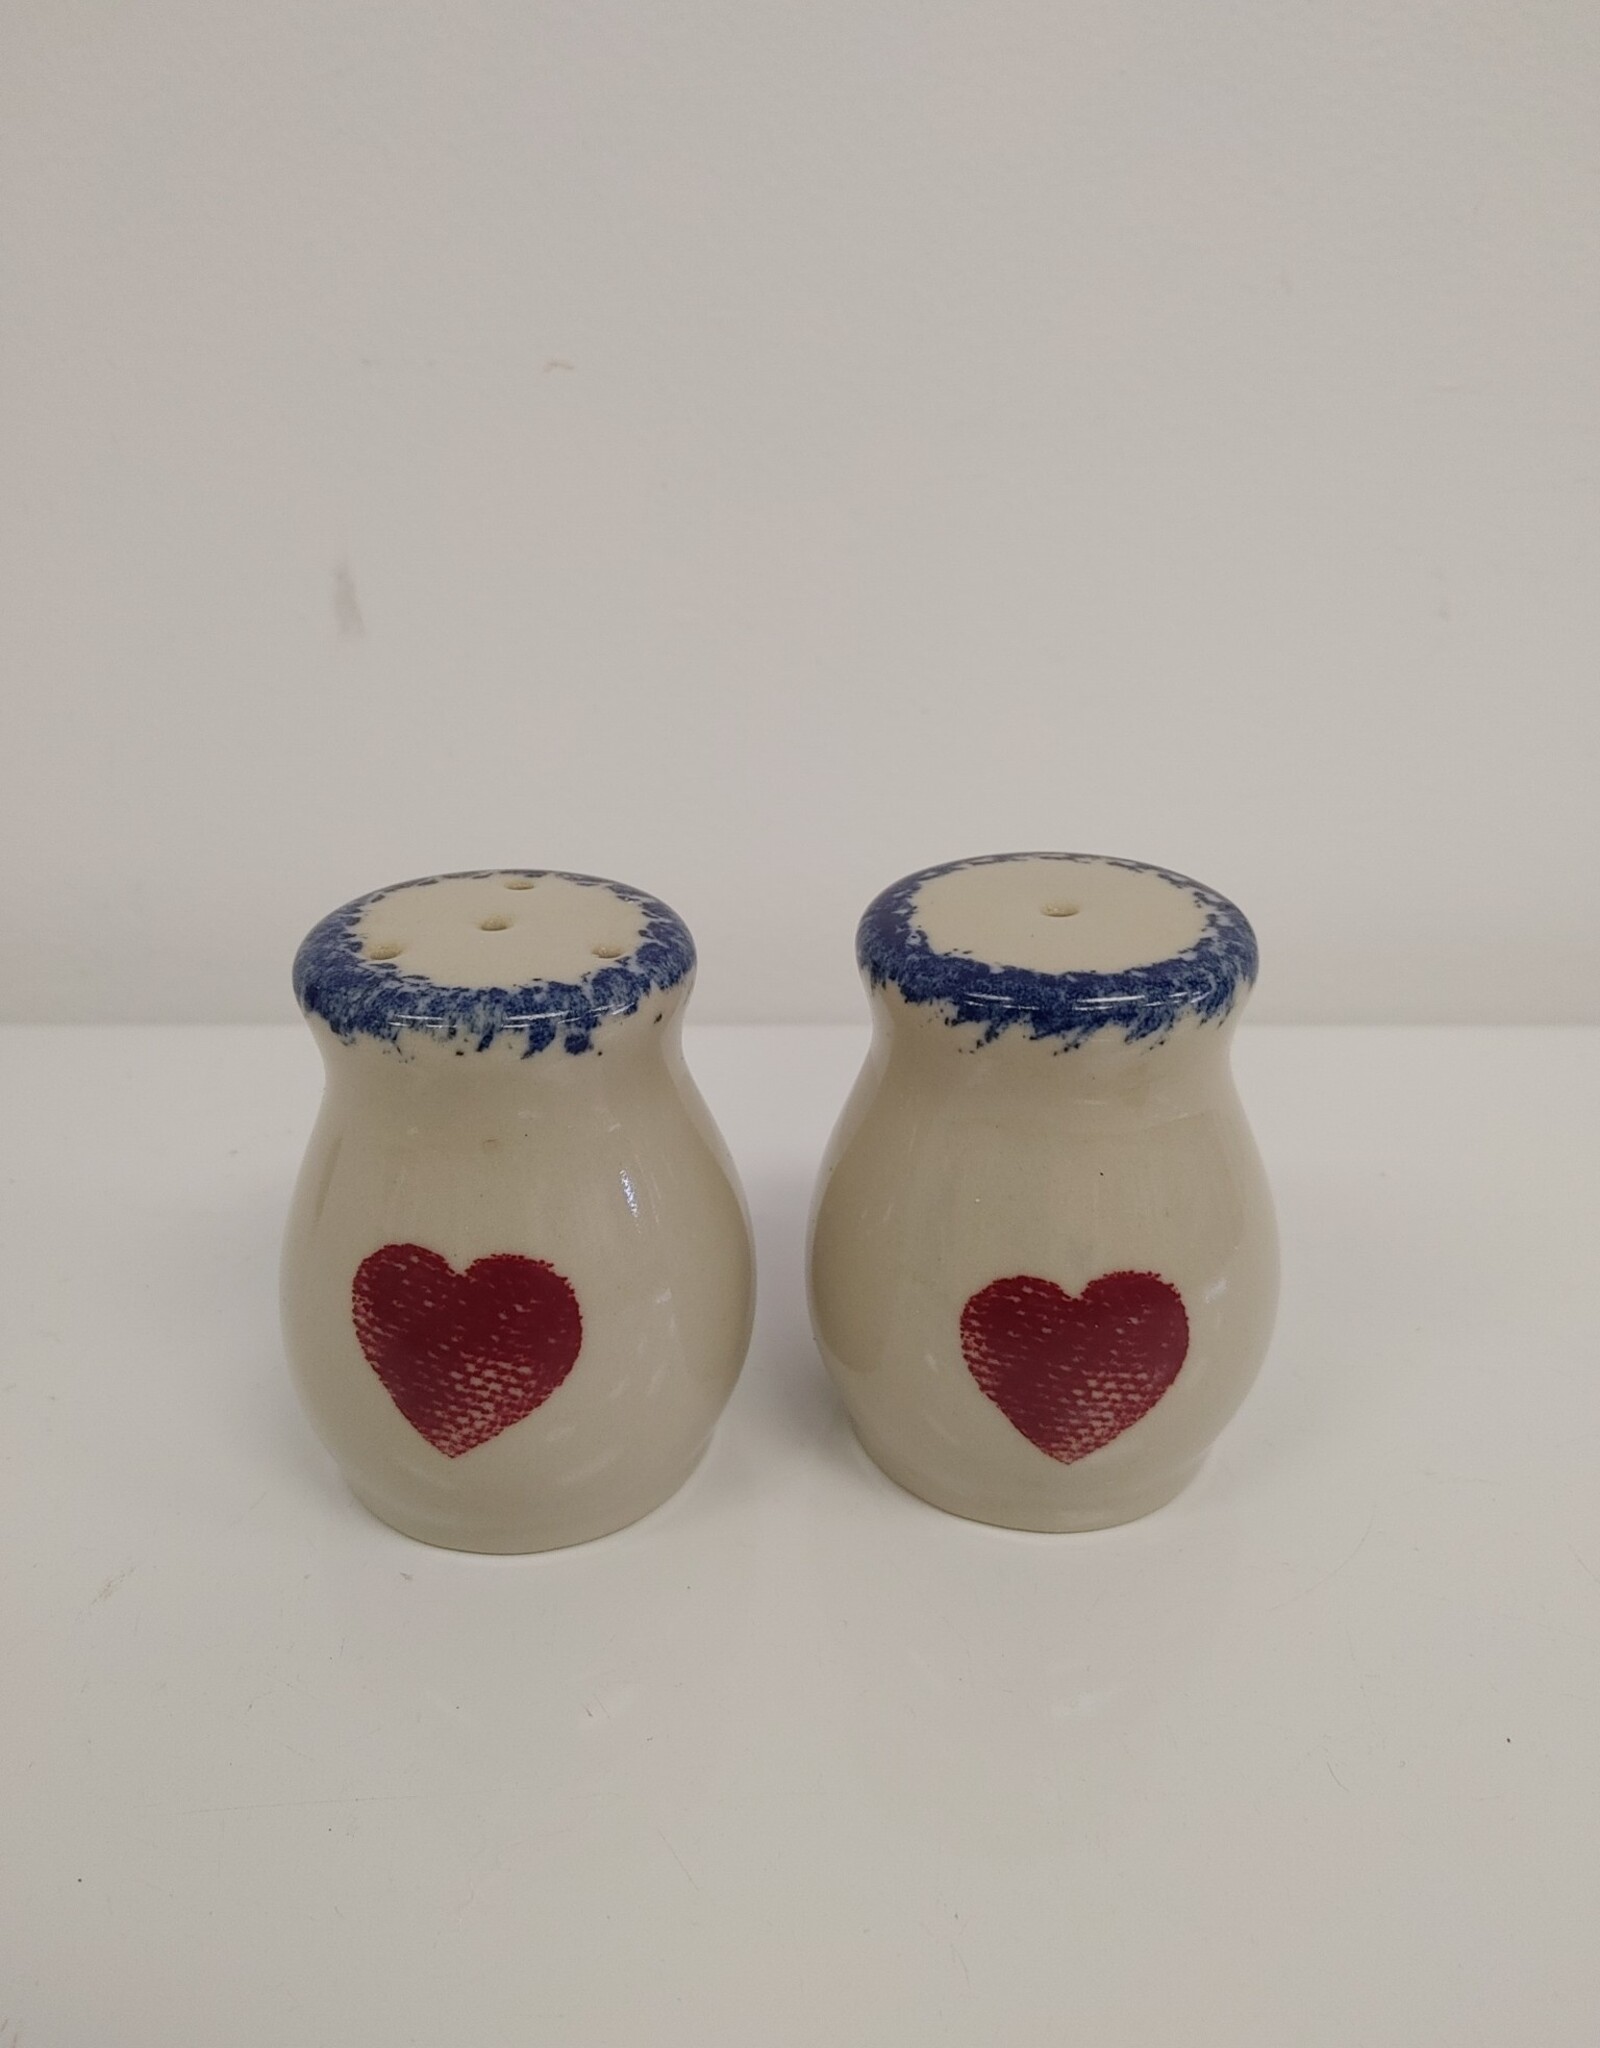 Apple Salt & Pepper Shakers -Brothers Stoneware Co.